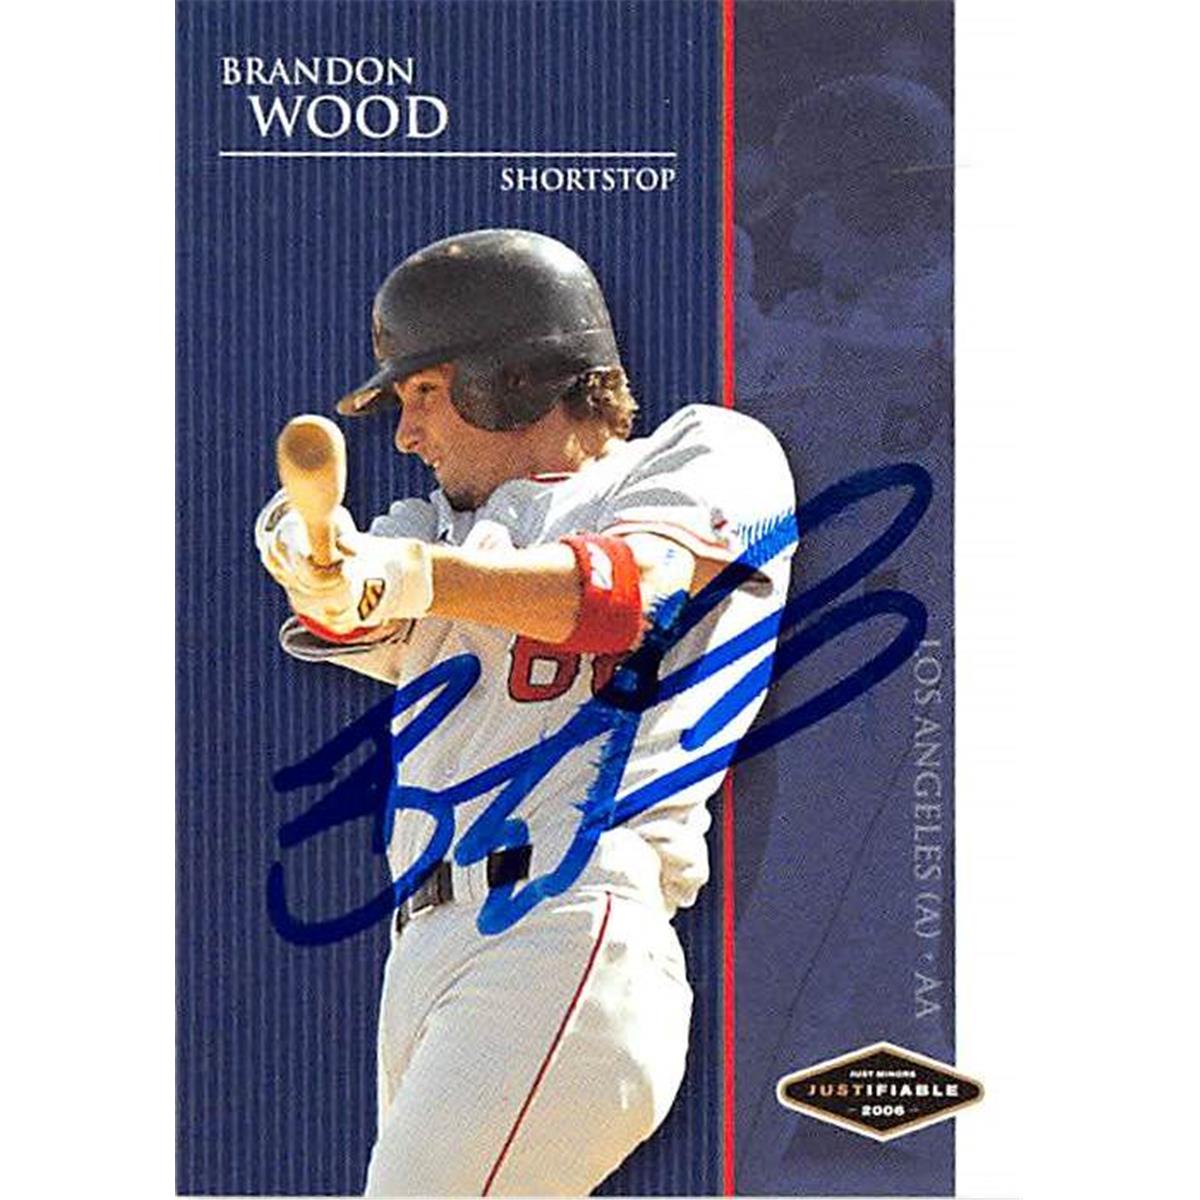 Picture of Autograph Warehouse 366361 Brandon Wood Autographed Baseball Card - Anaheim Angels 2006 Just Minors No.JF50